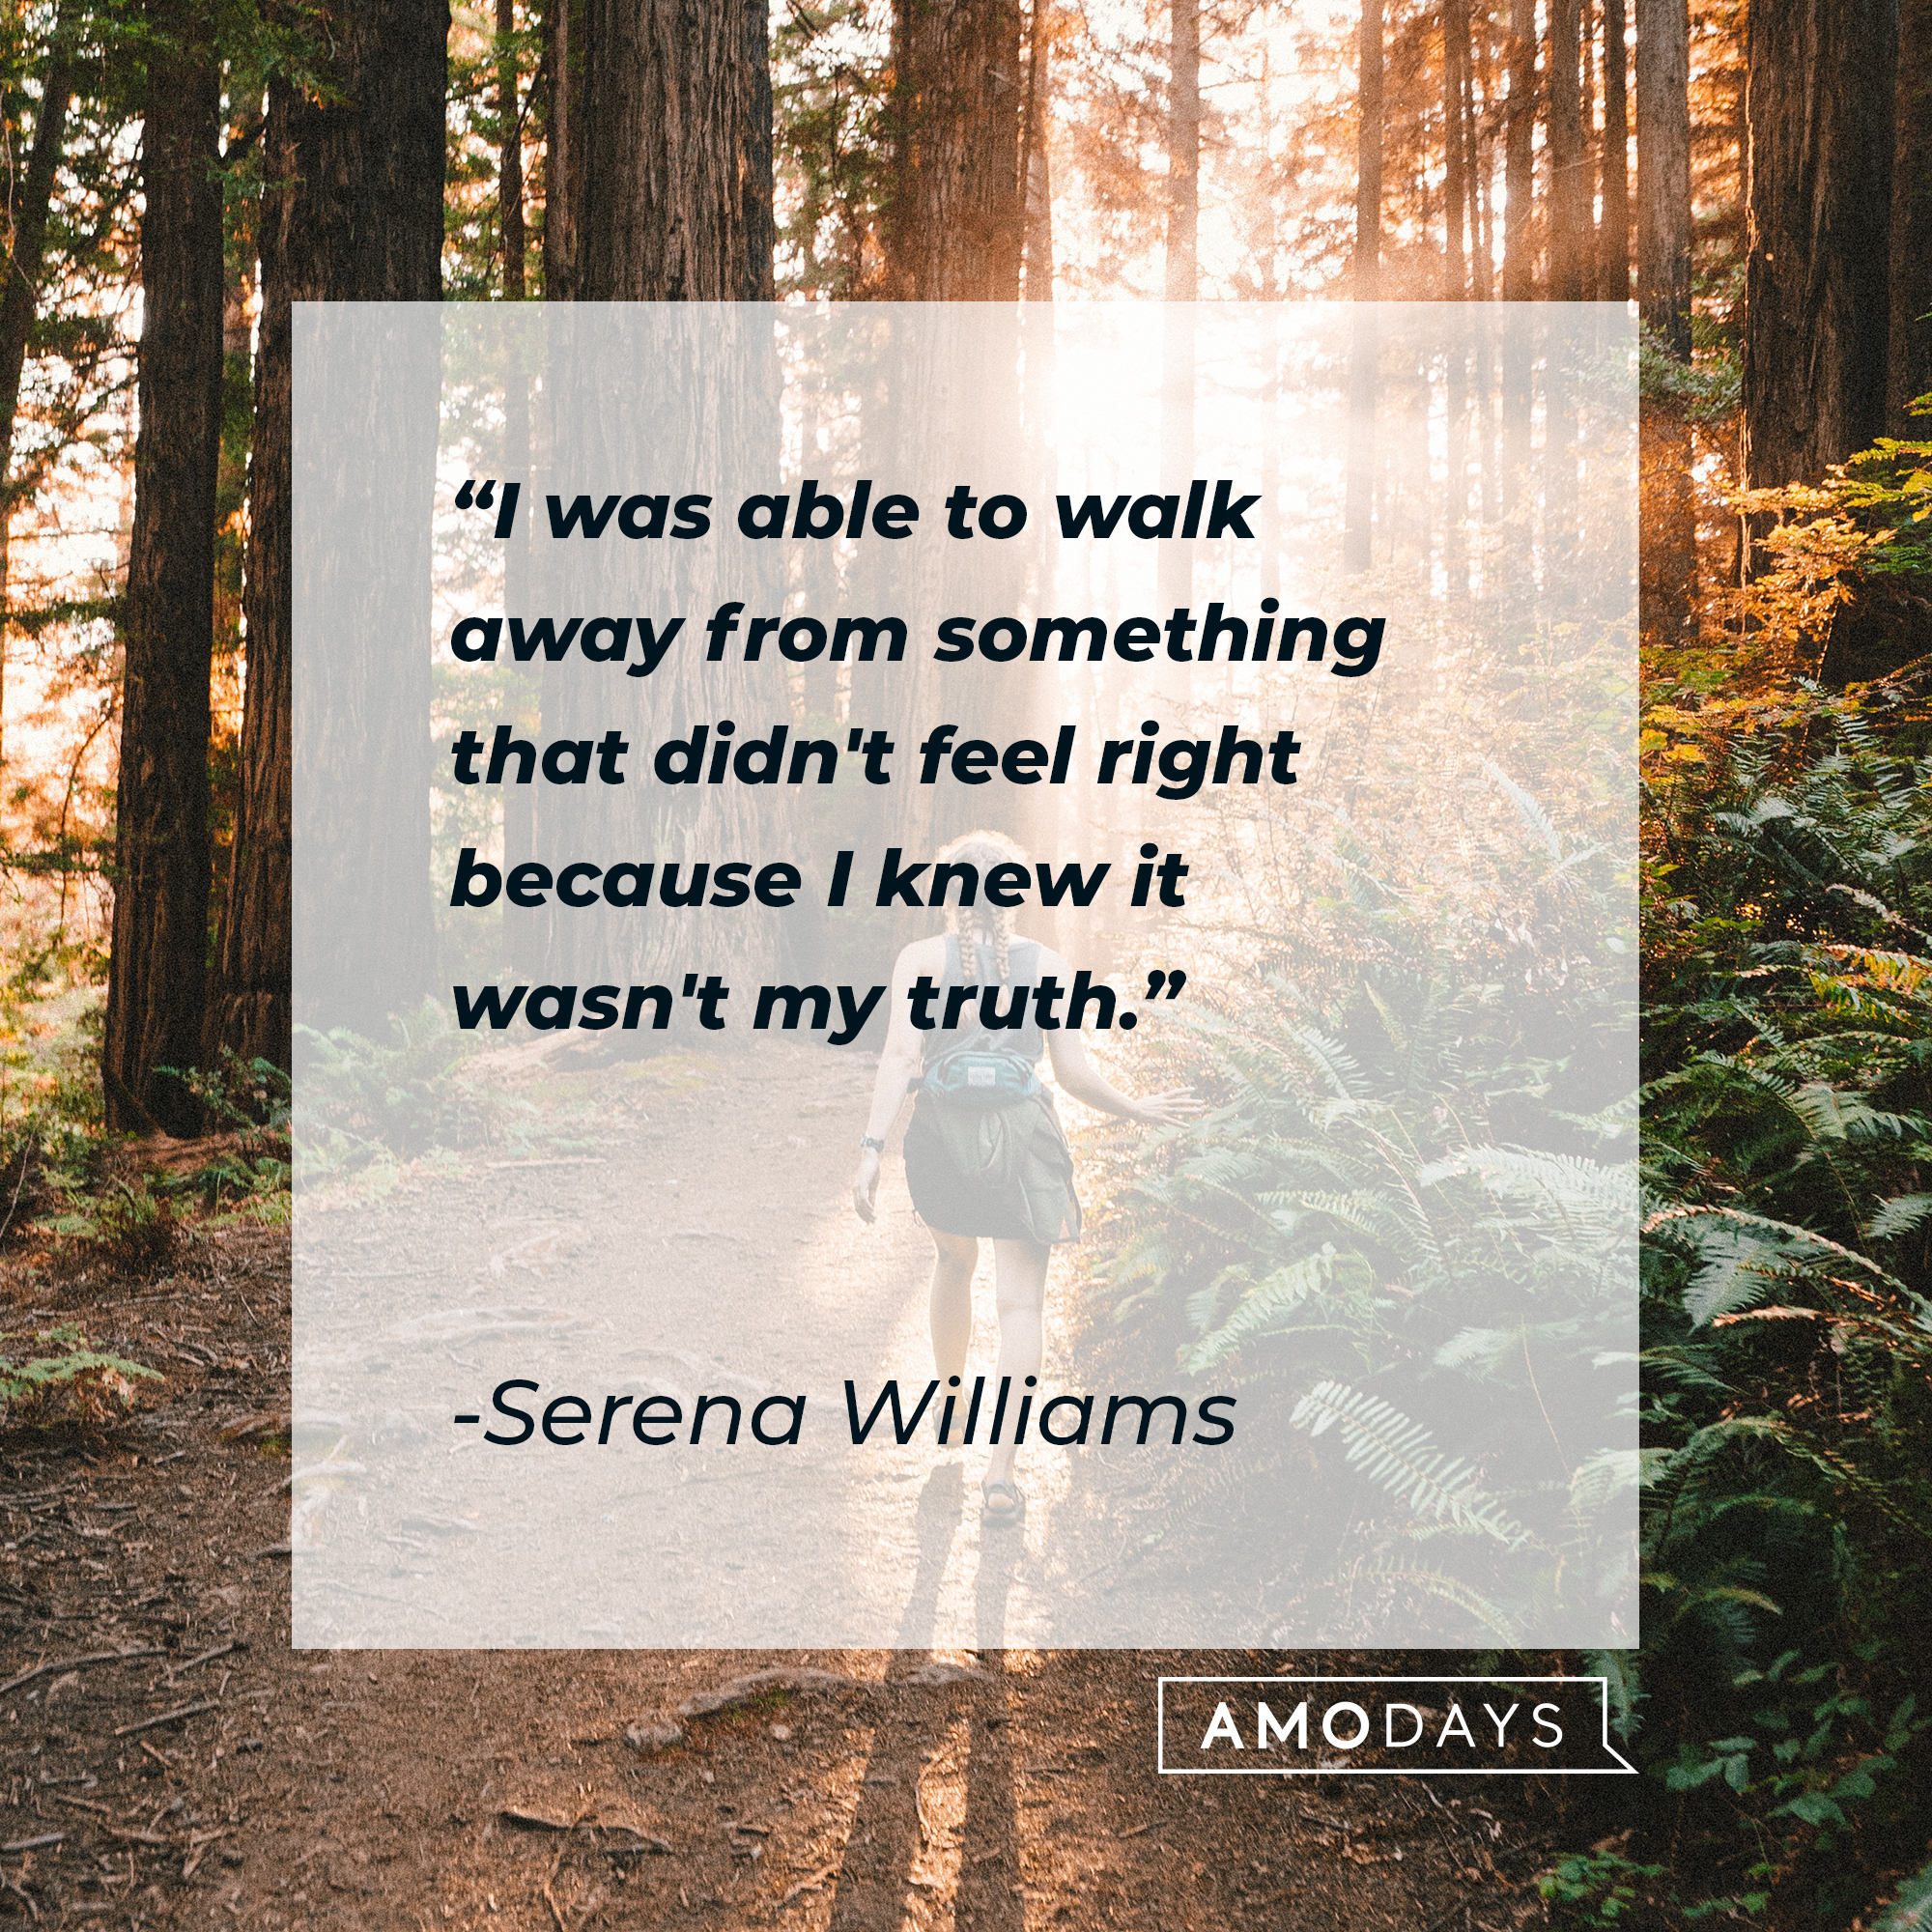 Serena Williams' quote: "I was able to walk away from something that didn't feel right because I knew it wasn't my truth." | Image: Unsplash.com